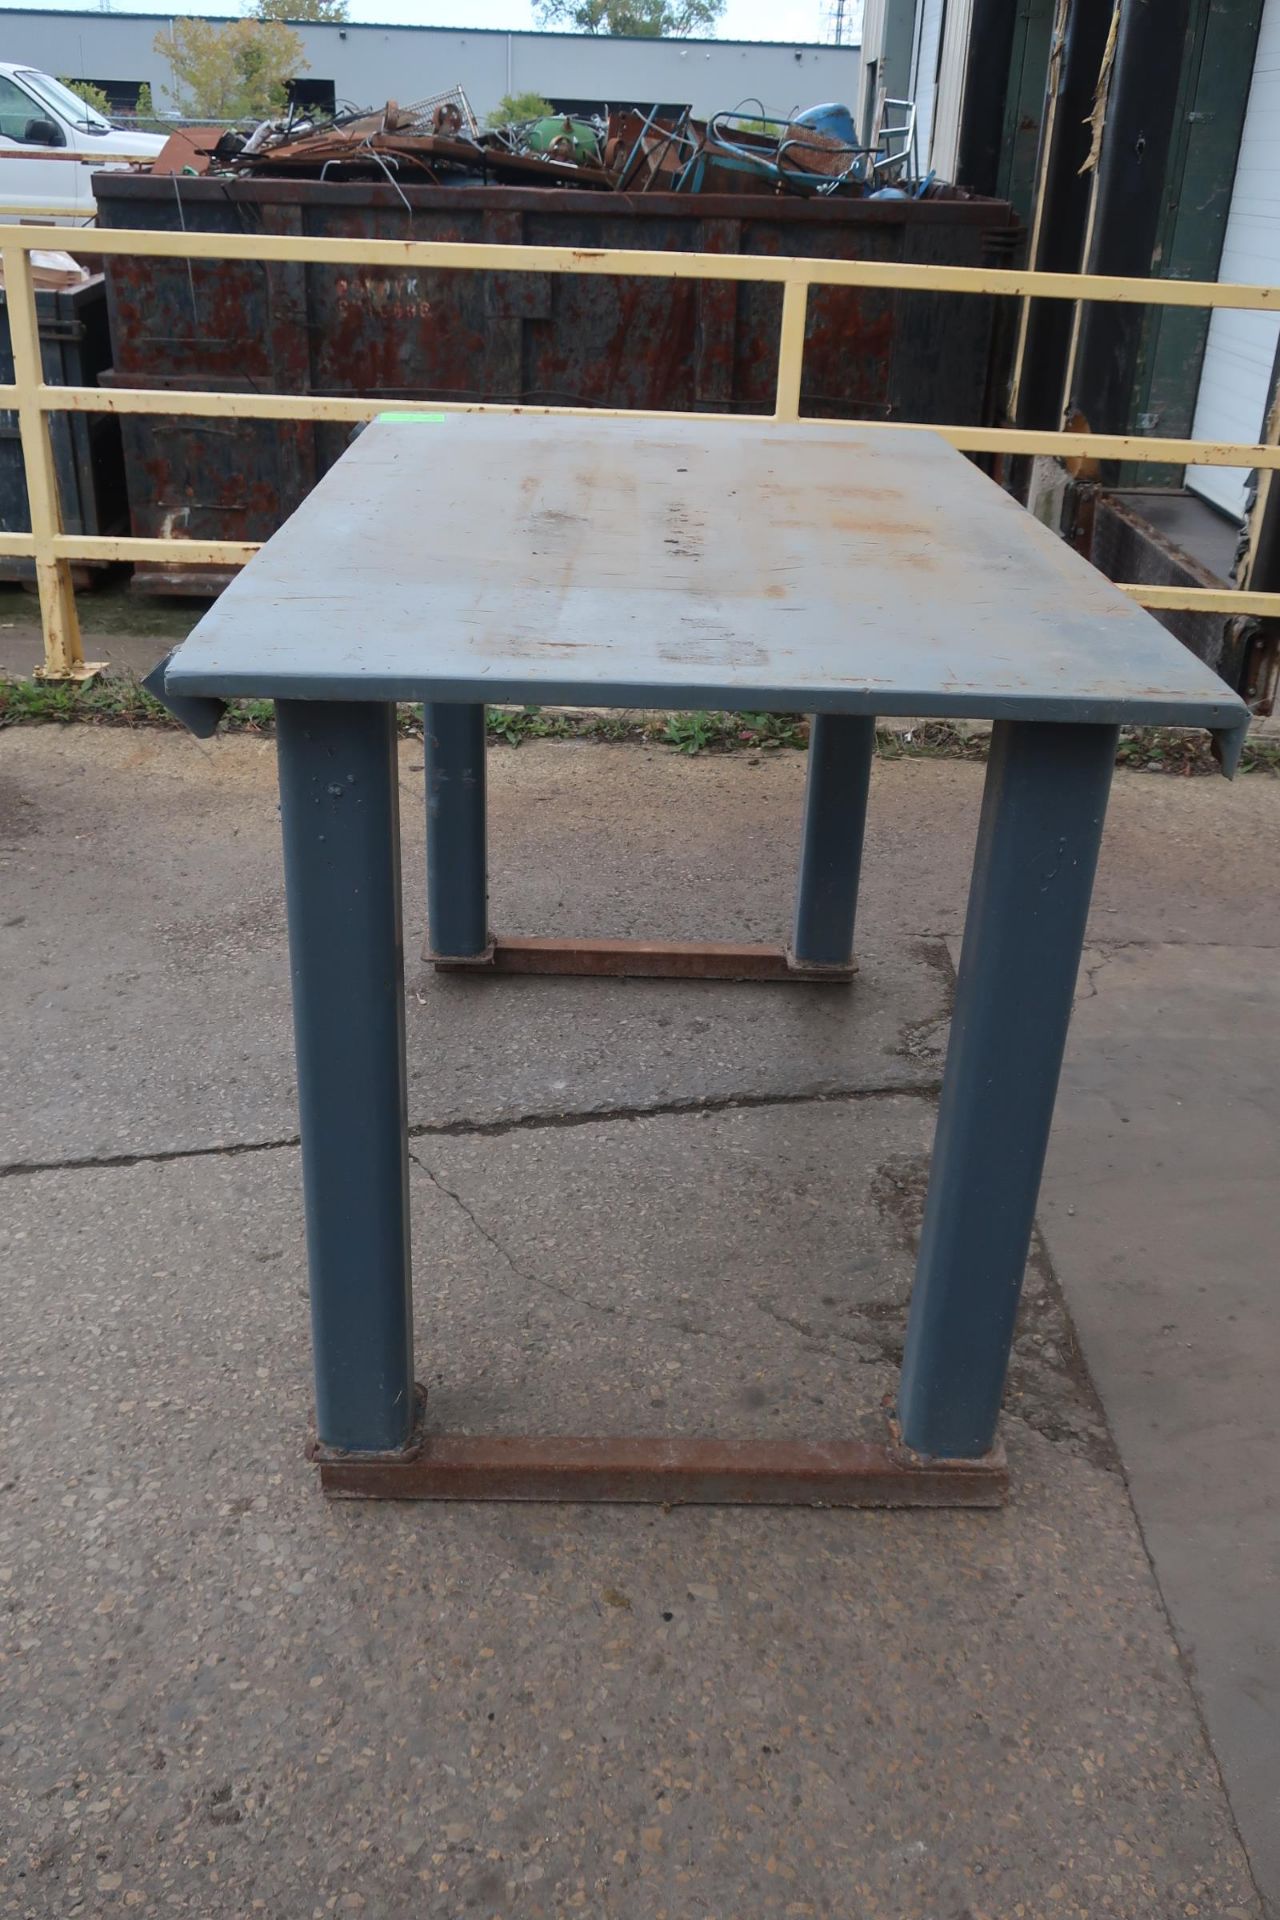 Industrial Heavy Duty Work Table - 60 x 36 x 38" tall - Image 2 of 2